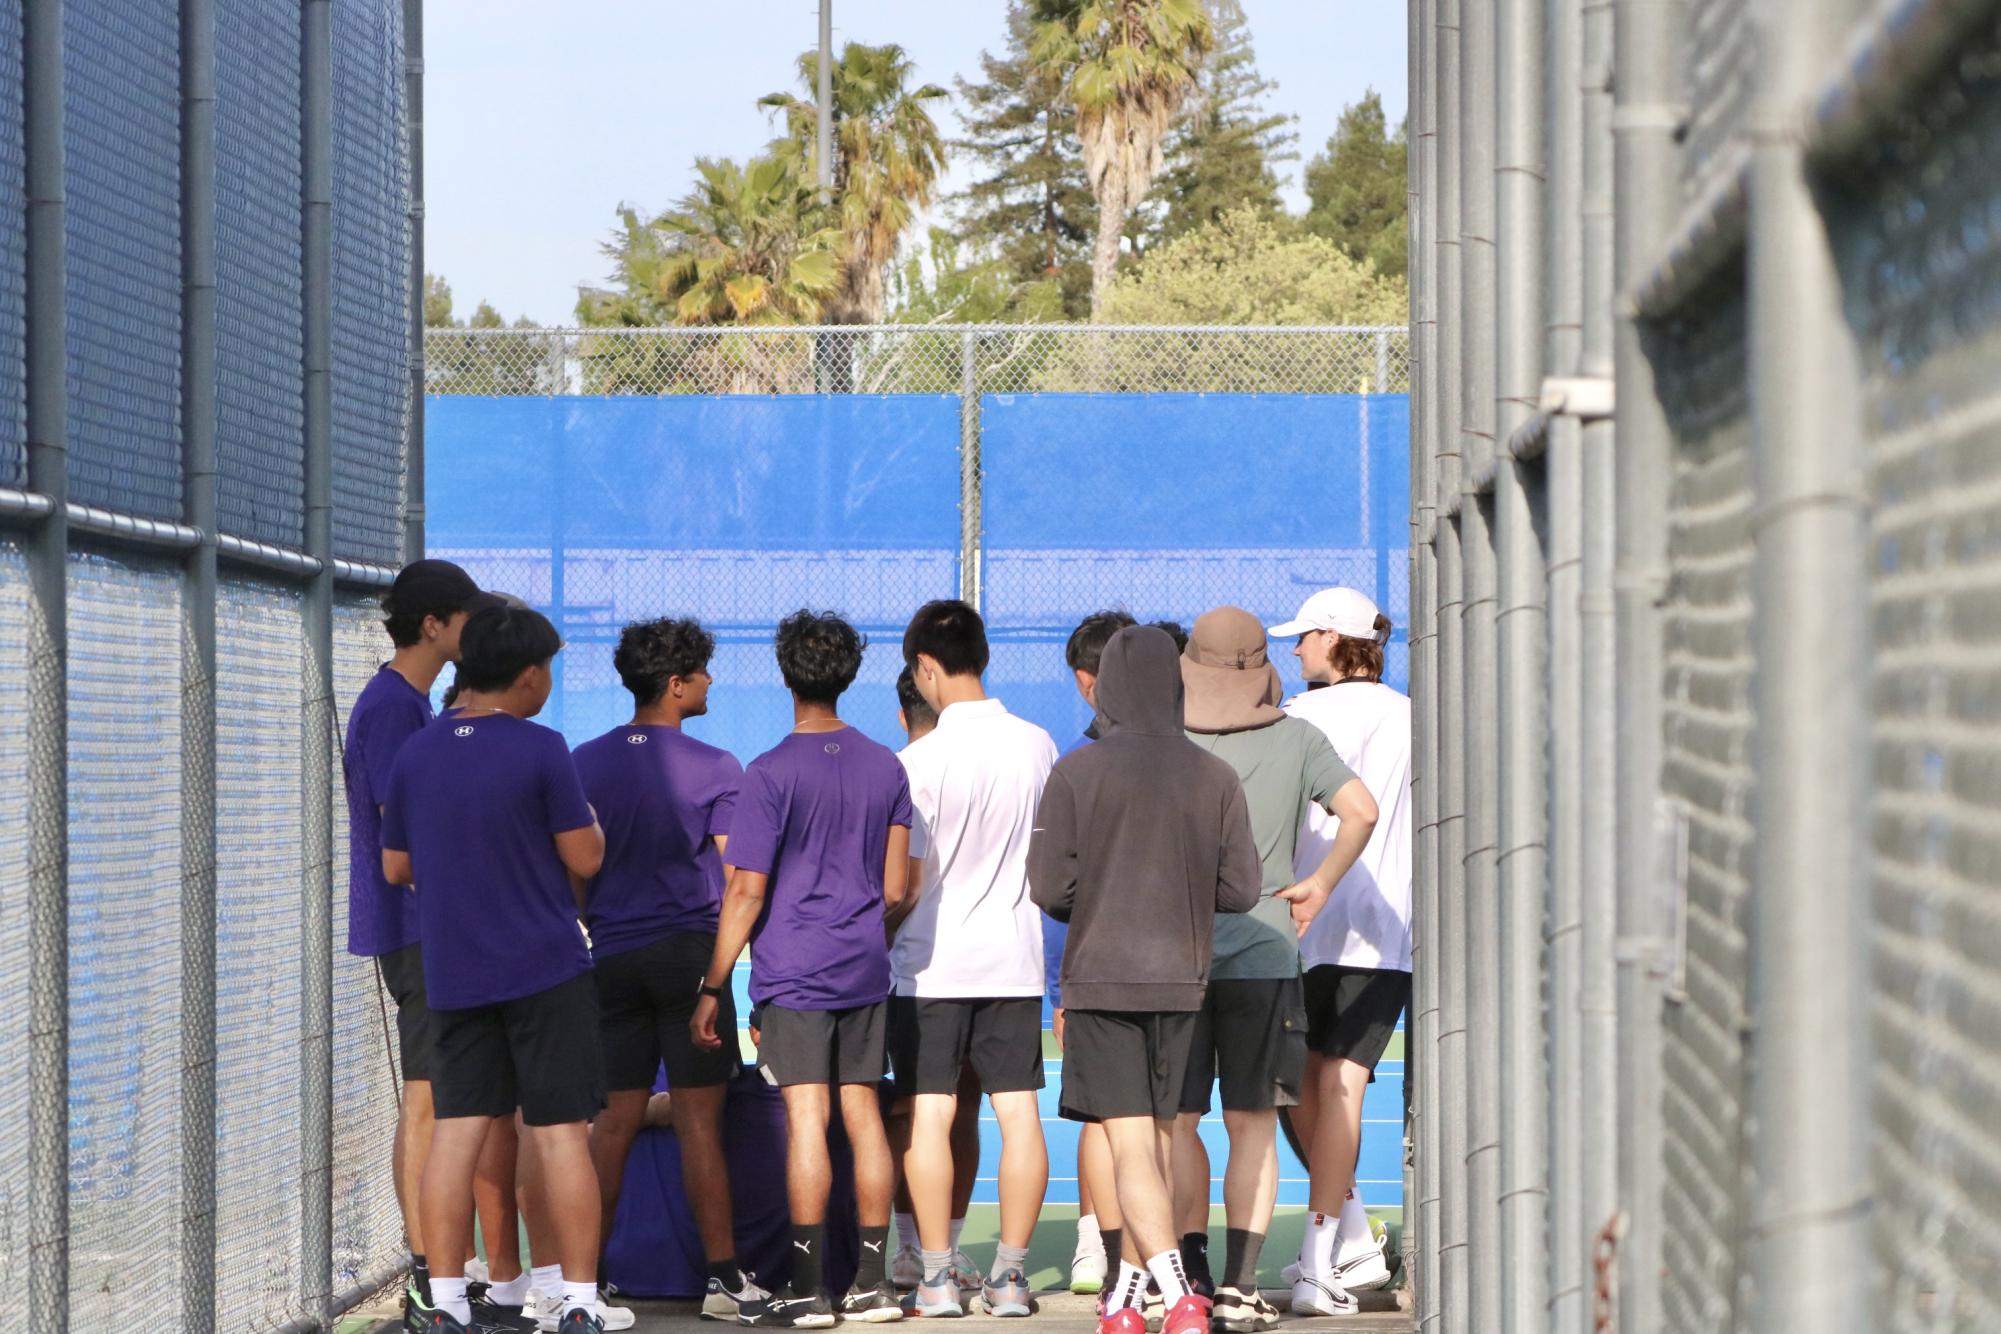 Amadors+Boys+Tennis+team+defeats+Foothill+in+highly+anticipated+rivalry+rematch+and+secures+a+bid+into+NCS